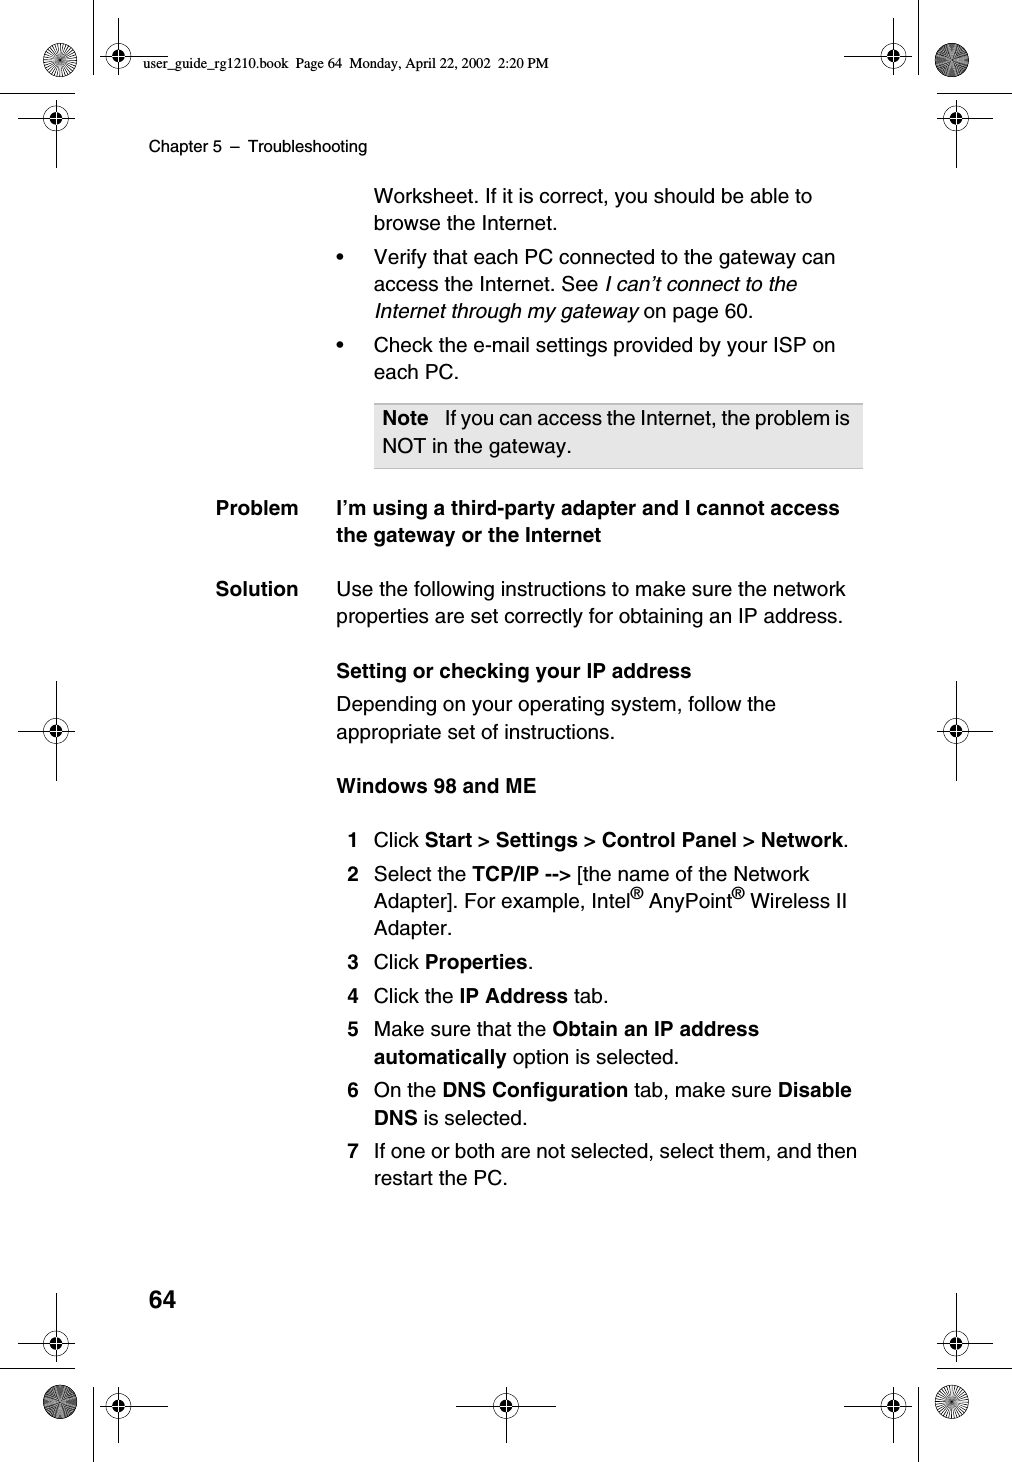 Chapter 5 –Troubleshooting64Worksheet. If it is correct, you should be able tobrowse the Internet.•Verify that each PC connected to the gateway canaccess the Internet. See I can’t connect to theInternet through my gateway on page 60.•Check the e-mail settings provided by your ISP oneach PC.Problem I’m using a third-party adapter and I cannot accessthe gateway or the InternetSolution Use the following instructions to make sure the networkproperties are set correctly for obtaining an IP address.Setting or checking your IP addressDepending on your operating system, follow theappropriate set of instructions.Windows 98 and ME1Click Start &gt; Settings &gt; Control Panel &gt; Network.2Select the TCP/IP --&gt; [the name of the NetworkAdapter]. For example, Intel®AnyPoint®Wireless IIAdapter.3Click Properties.4Click the IP Address tab.5Make sure that the Obtain an IP addressautomatically option is selected.6On the DNS Configuration tab, make sure DisableDNS is selected.7If one or both are not selected, select them, and thenrestart the PC.Note If you can access the Internet, the problem isNOT in the gateway.user_guide_rg1210.book Page 64 Monday, April 22, 2002 2:20 PM